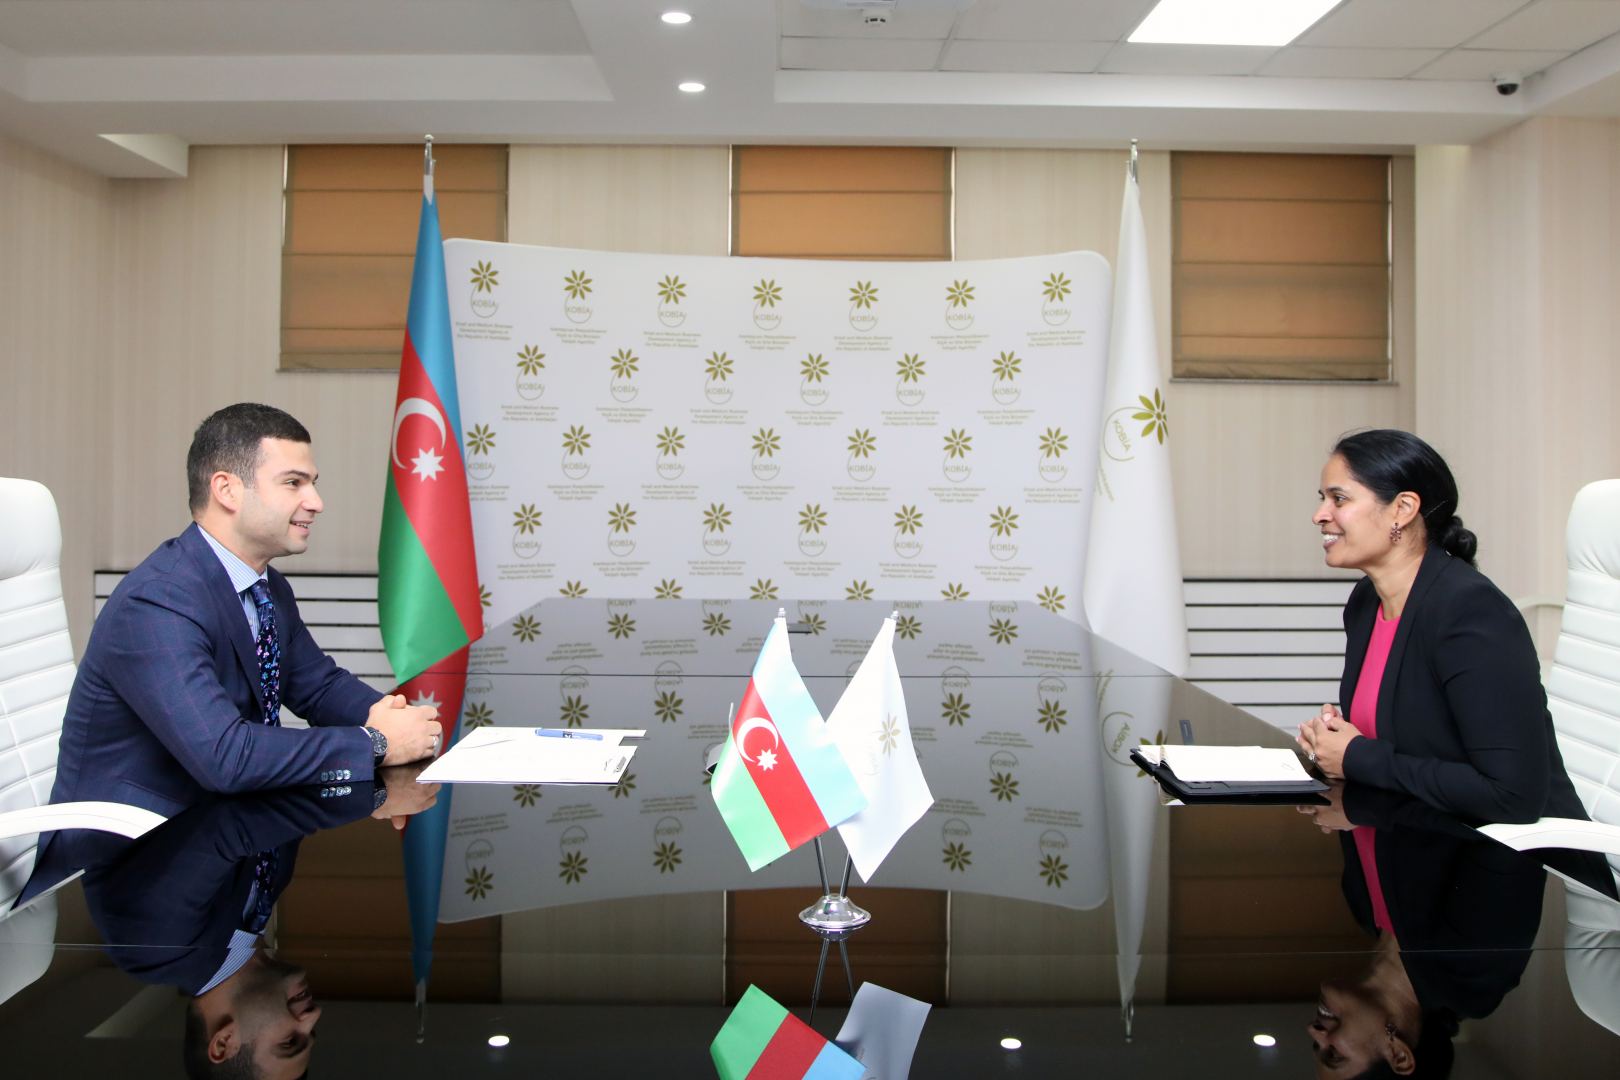 Azerbaijan's SMBDA and WB discuss expansion of SME's access to financing